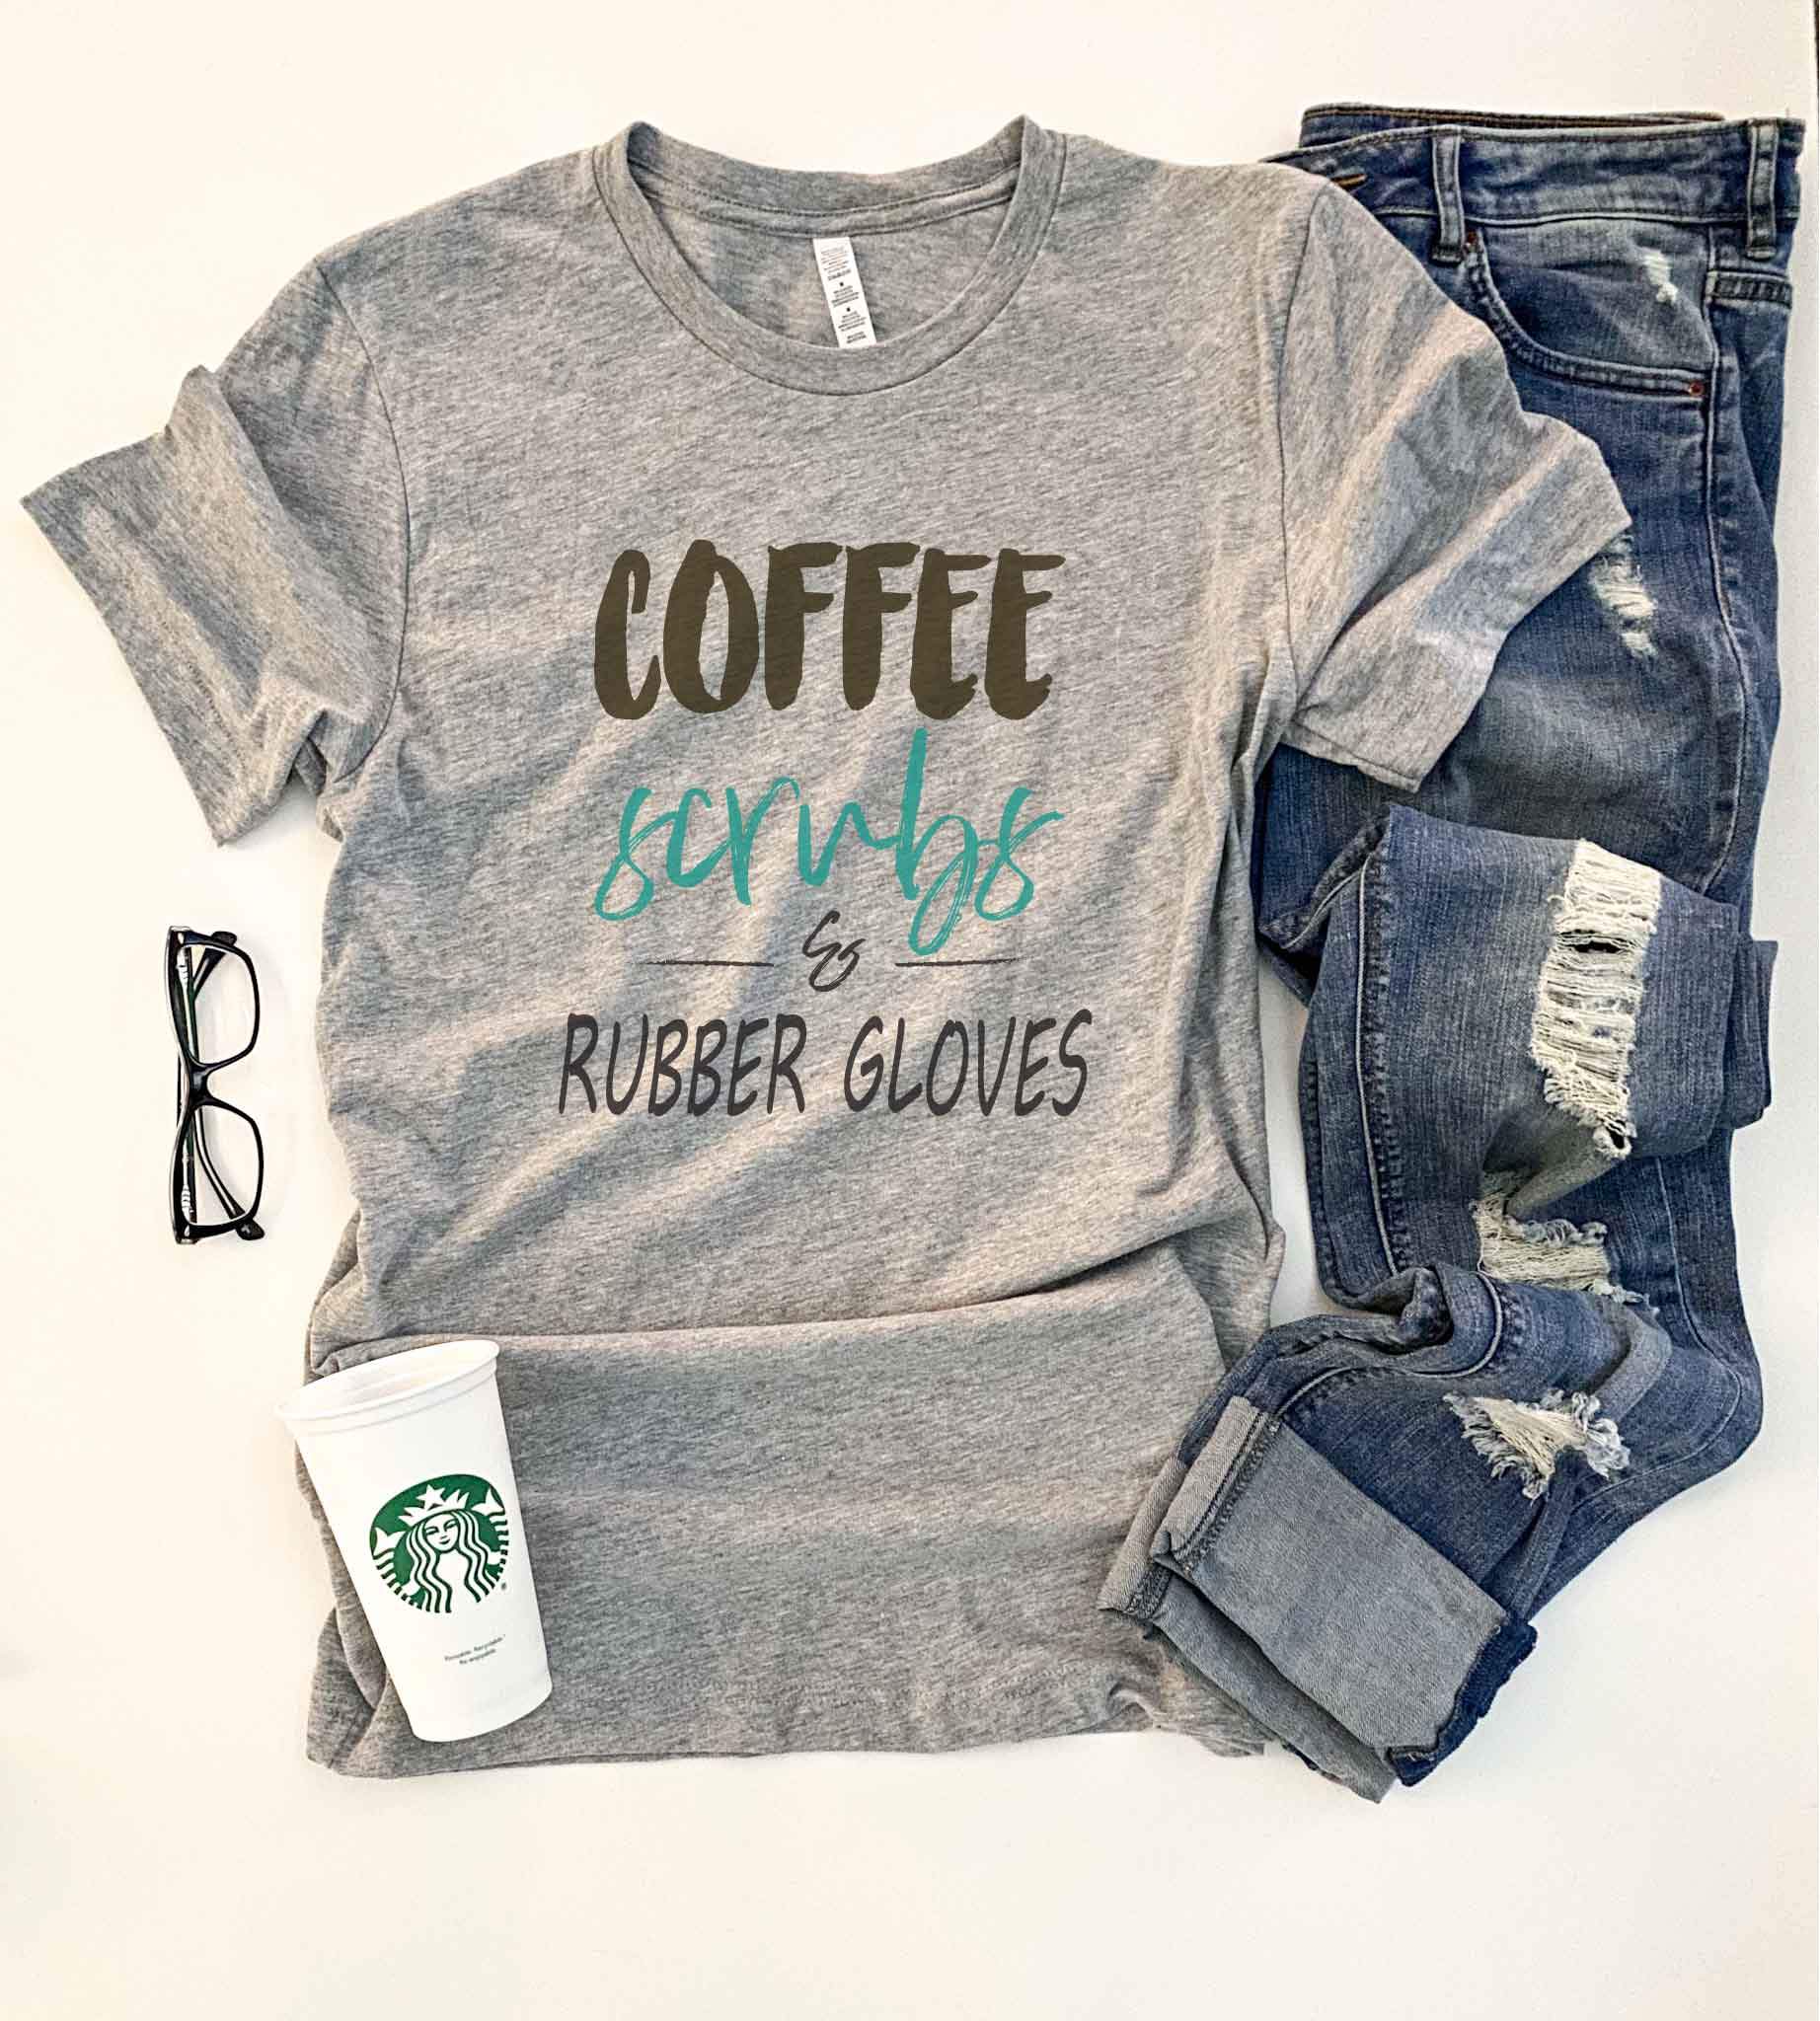 Coffee scrubs and rubber gloves tee Short sleeve healthcare tee Bella Canvas 3001 